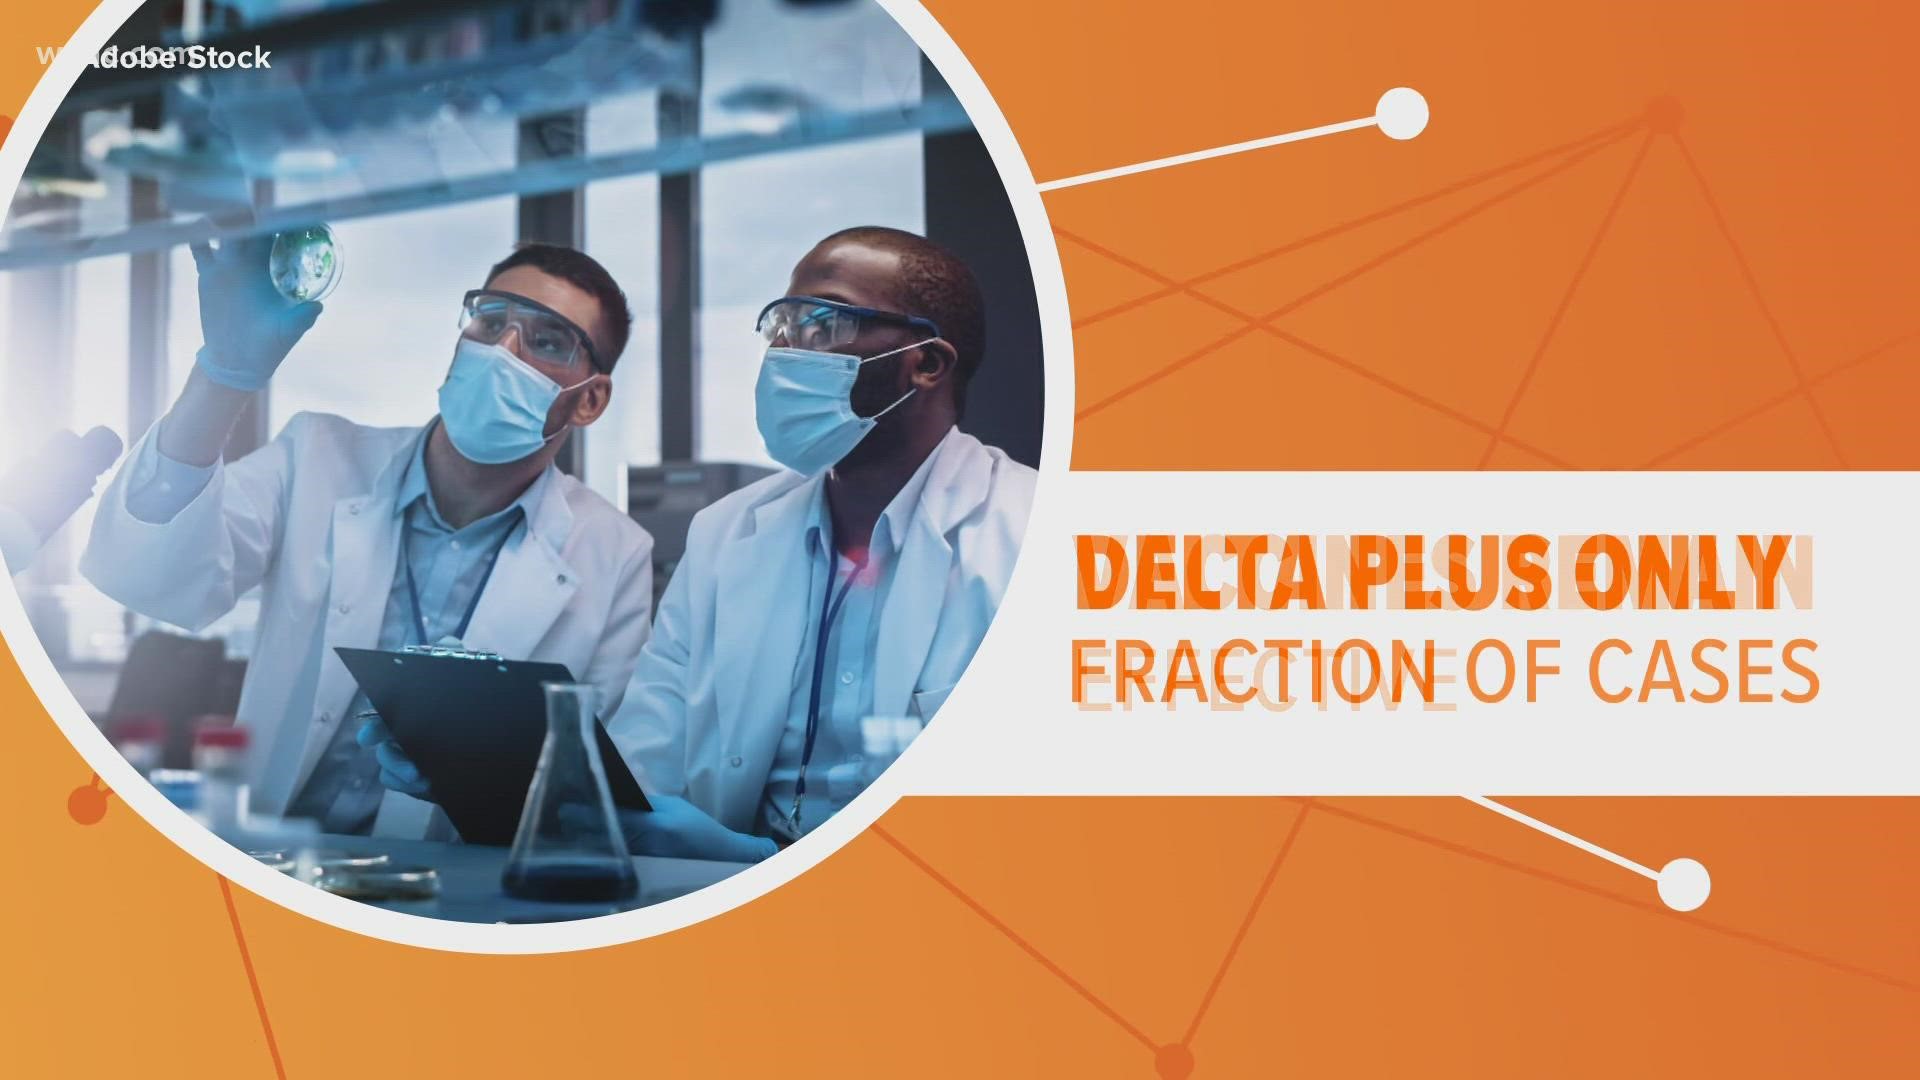 Don't let the name fool you. At this time, the CDC says delta plus is not a bigger health threat than the original delta strain.